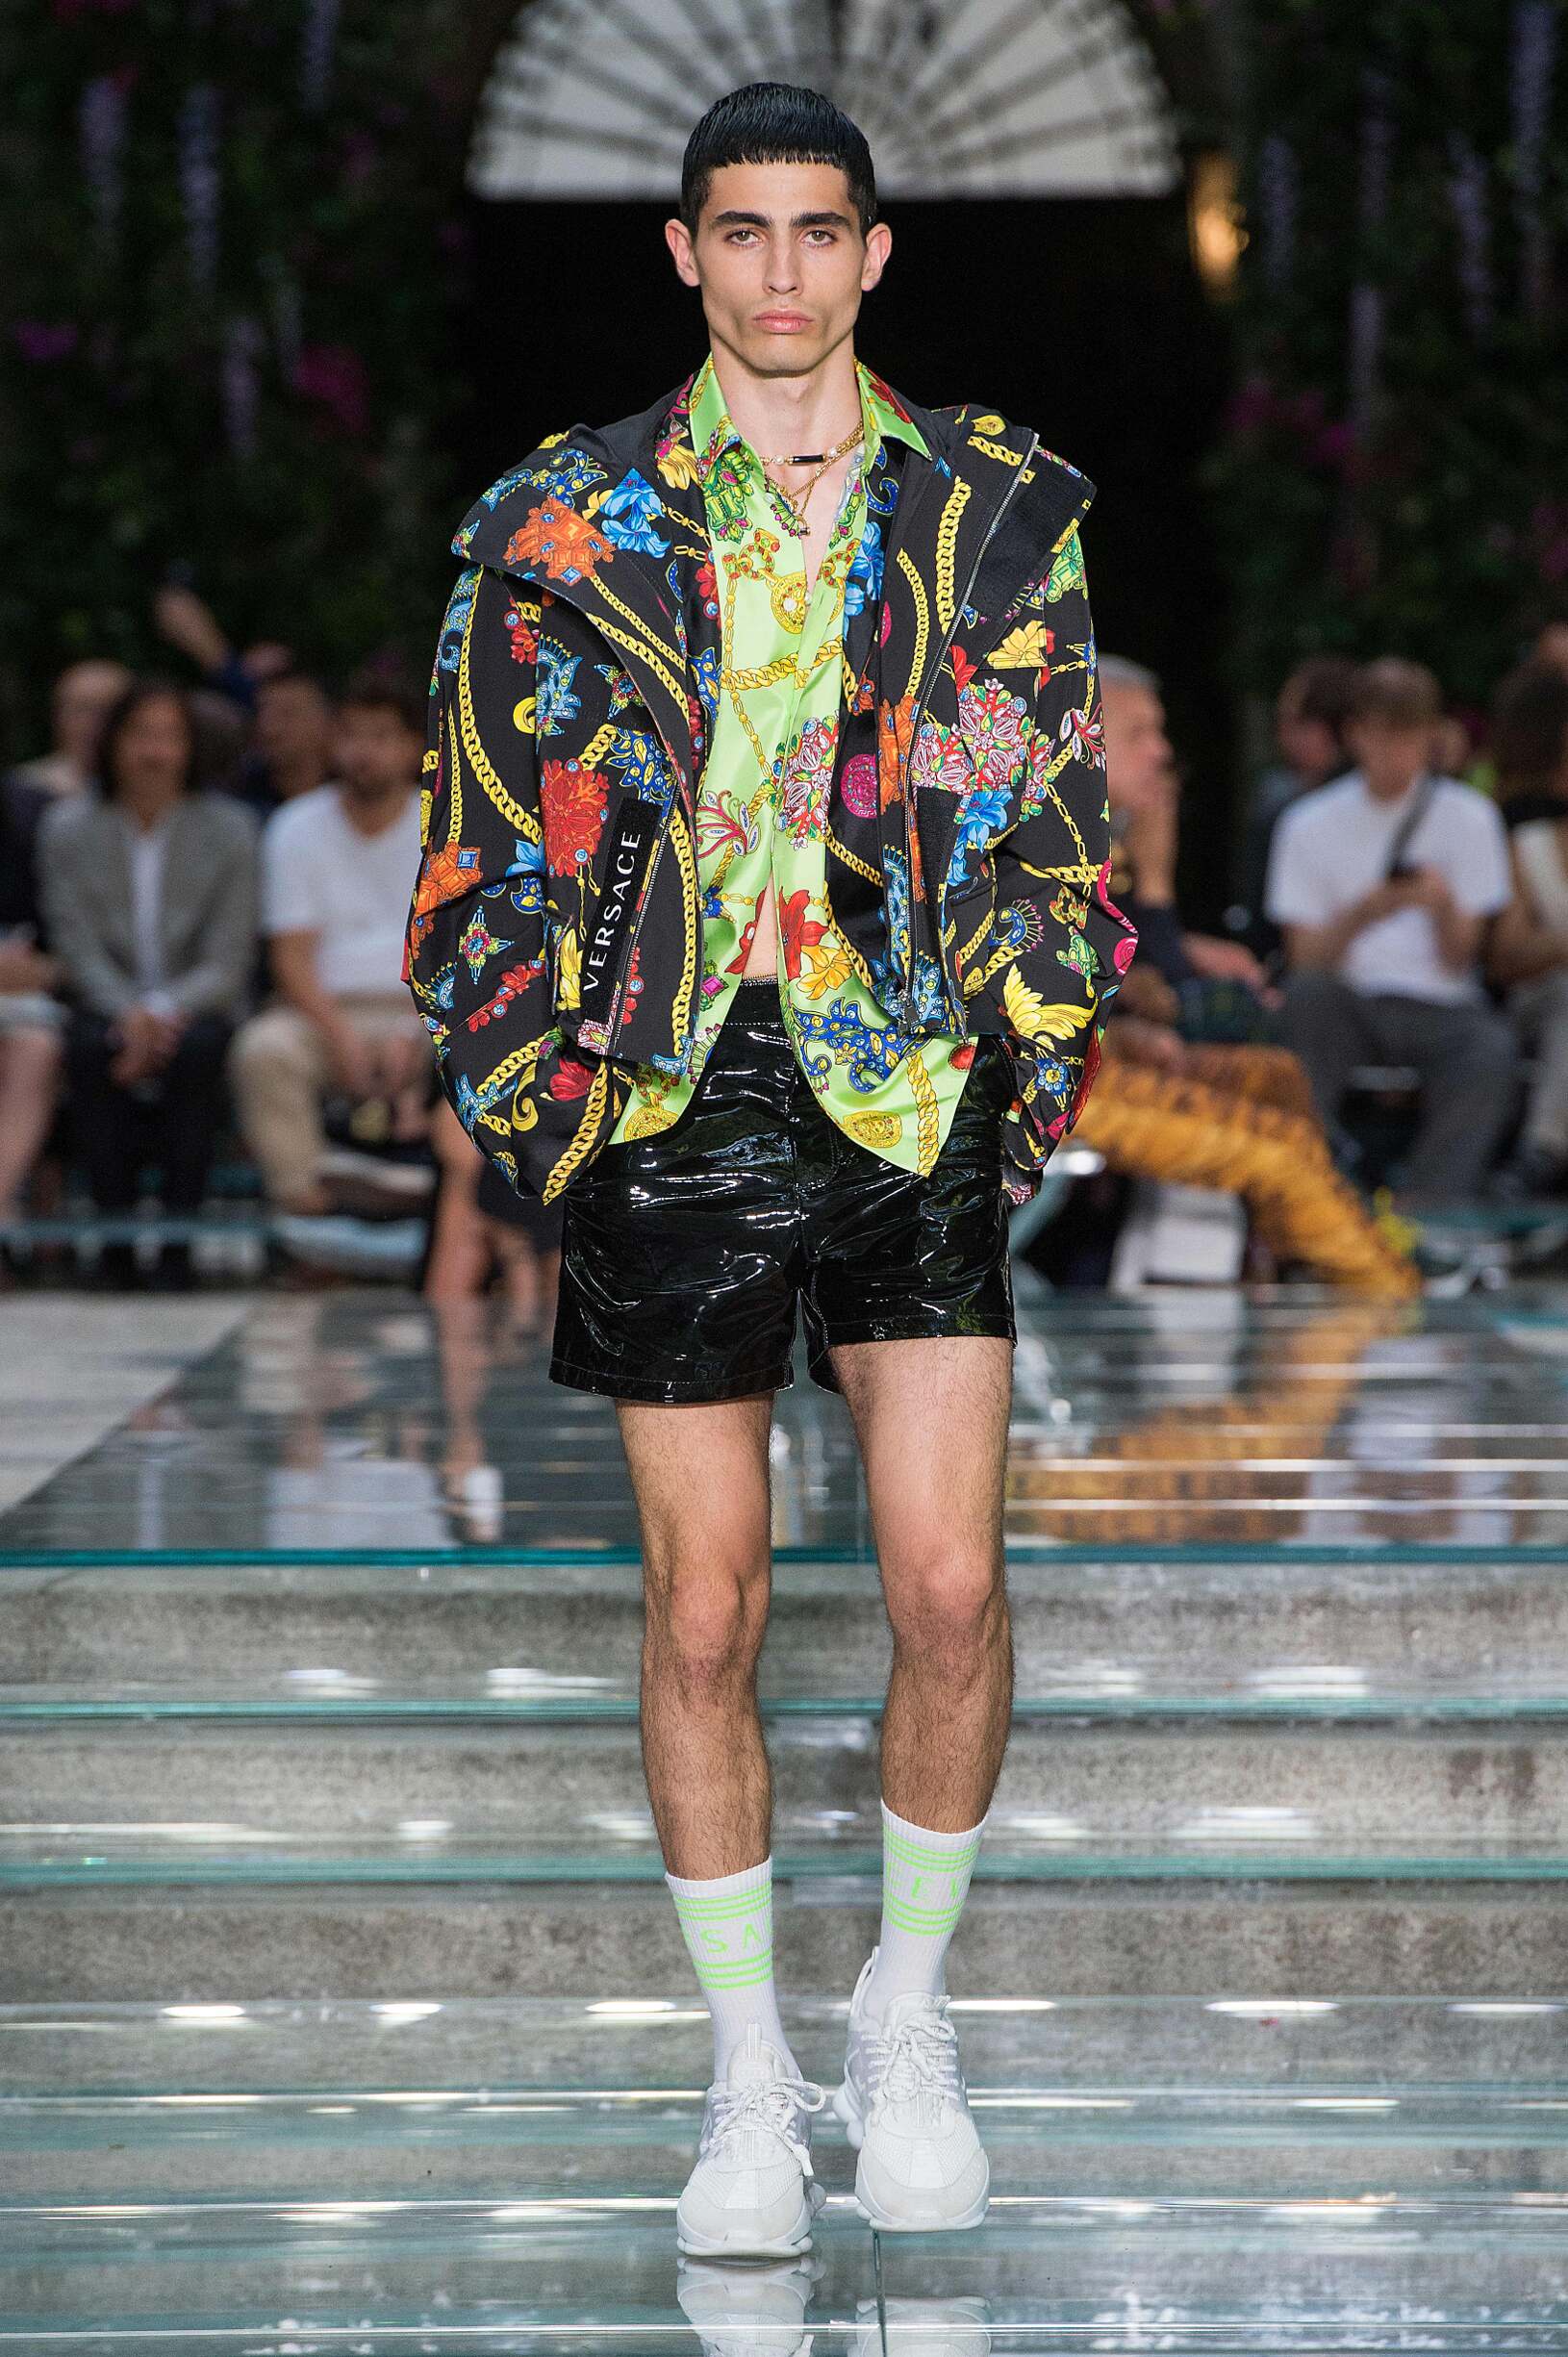 VERSACE SPRING SUMMER 2019 MEN’S COLLECTION | The Skinny Beep